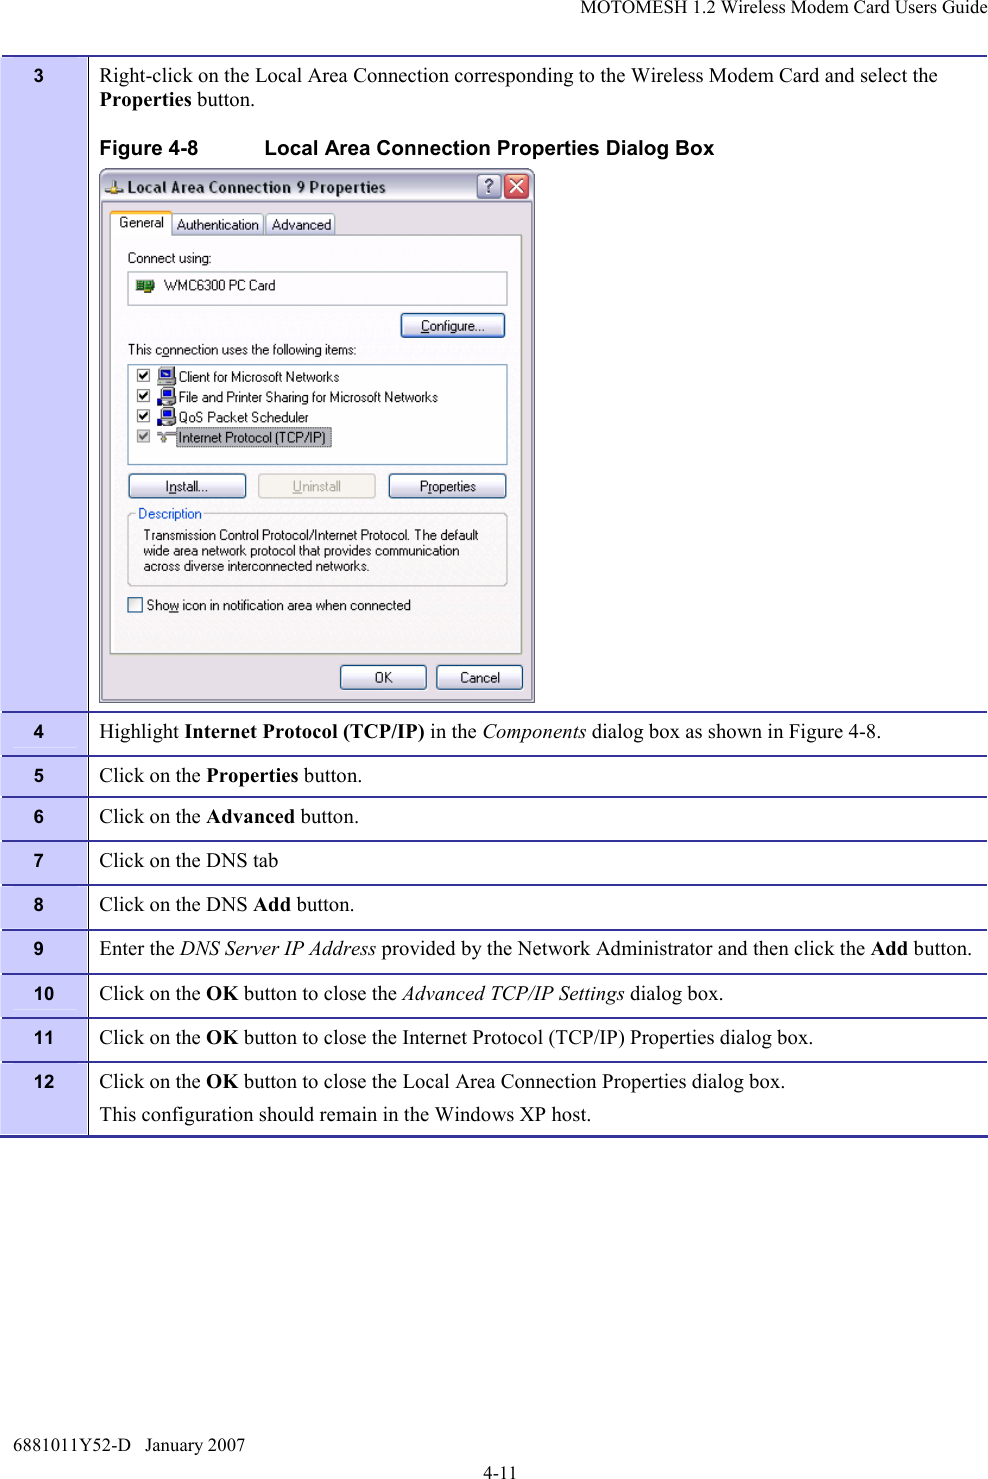 MOTOMESH 1.2 Wireless Modem Card Users Guide 6881011Y52-D   January 2007 4-11 3  Right-click on the Local Area Connection corresponding to the Wireless Modem Card and select the Properties button. Figure 4-8  Local Area Connection Properties Dialog Box  4  Highlight Internet Protocol (TCP/IP) in the Components dialog box as shown in Figure 4-8. 5  Click on the Properties button. 6  Click on the Advanced button. 7  Click on the DNS tab 8  Click on the DNS Add button. 9  Enter the DNS Server IP Address provided by the Network Administrator and then click the Add button. 10  Click on the OK button to close the Advanced TCP/IP Settings dialog box. 11  Click on the OK button to close the Internet Protocol (TCP/IP) Properties dialog box. 12  Click on the OK button to close the Local Area Connection Properties dialog box. This configuration should remain in the Windows XP host. 